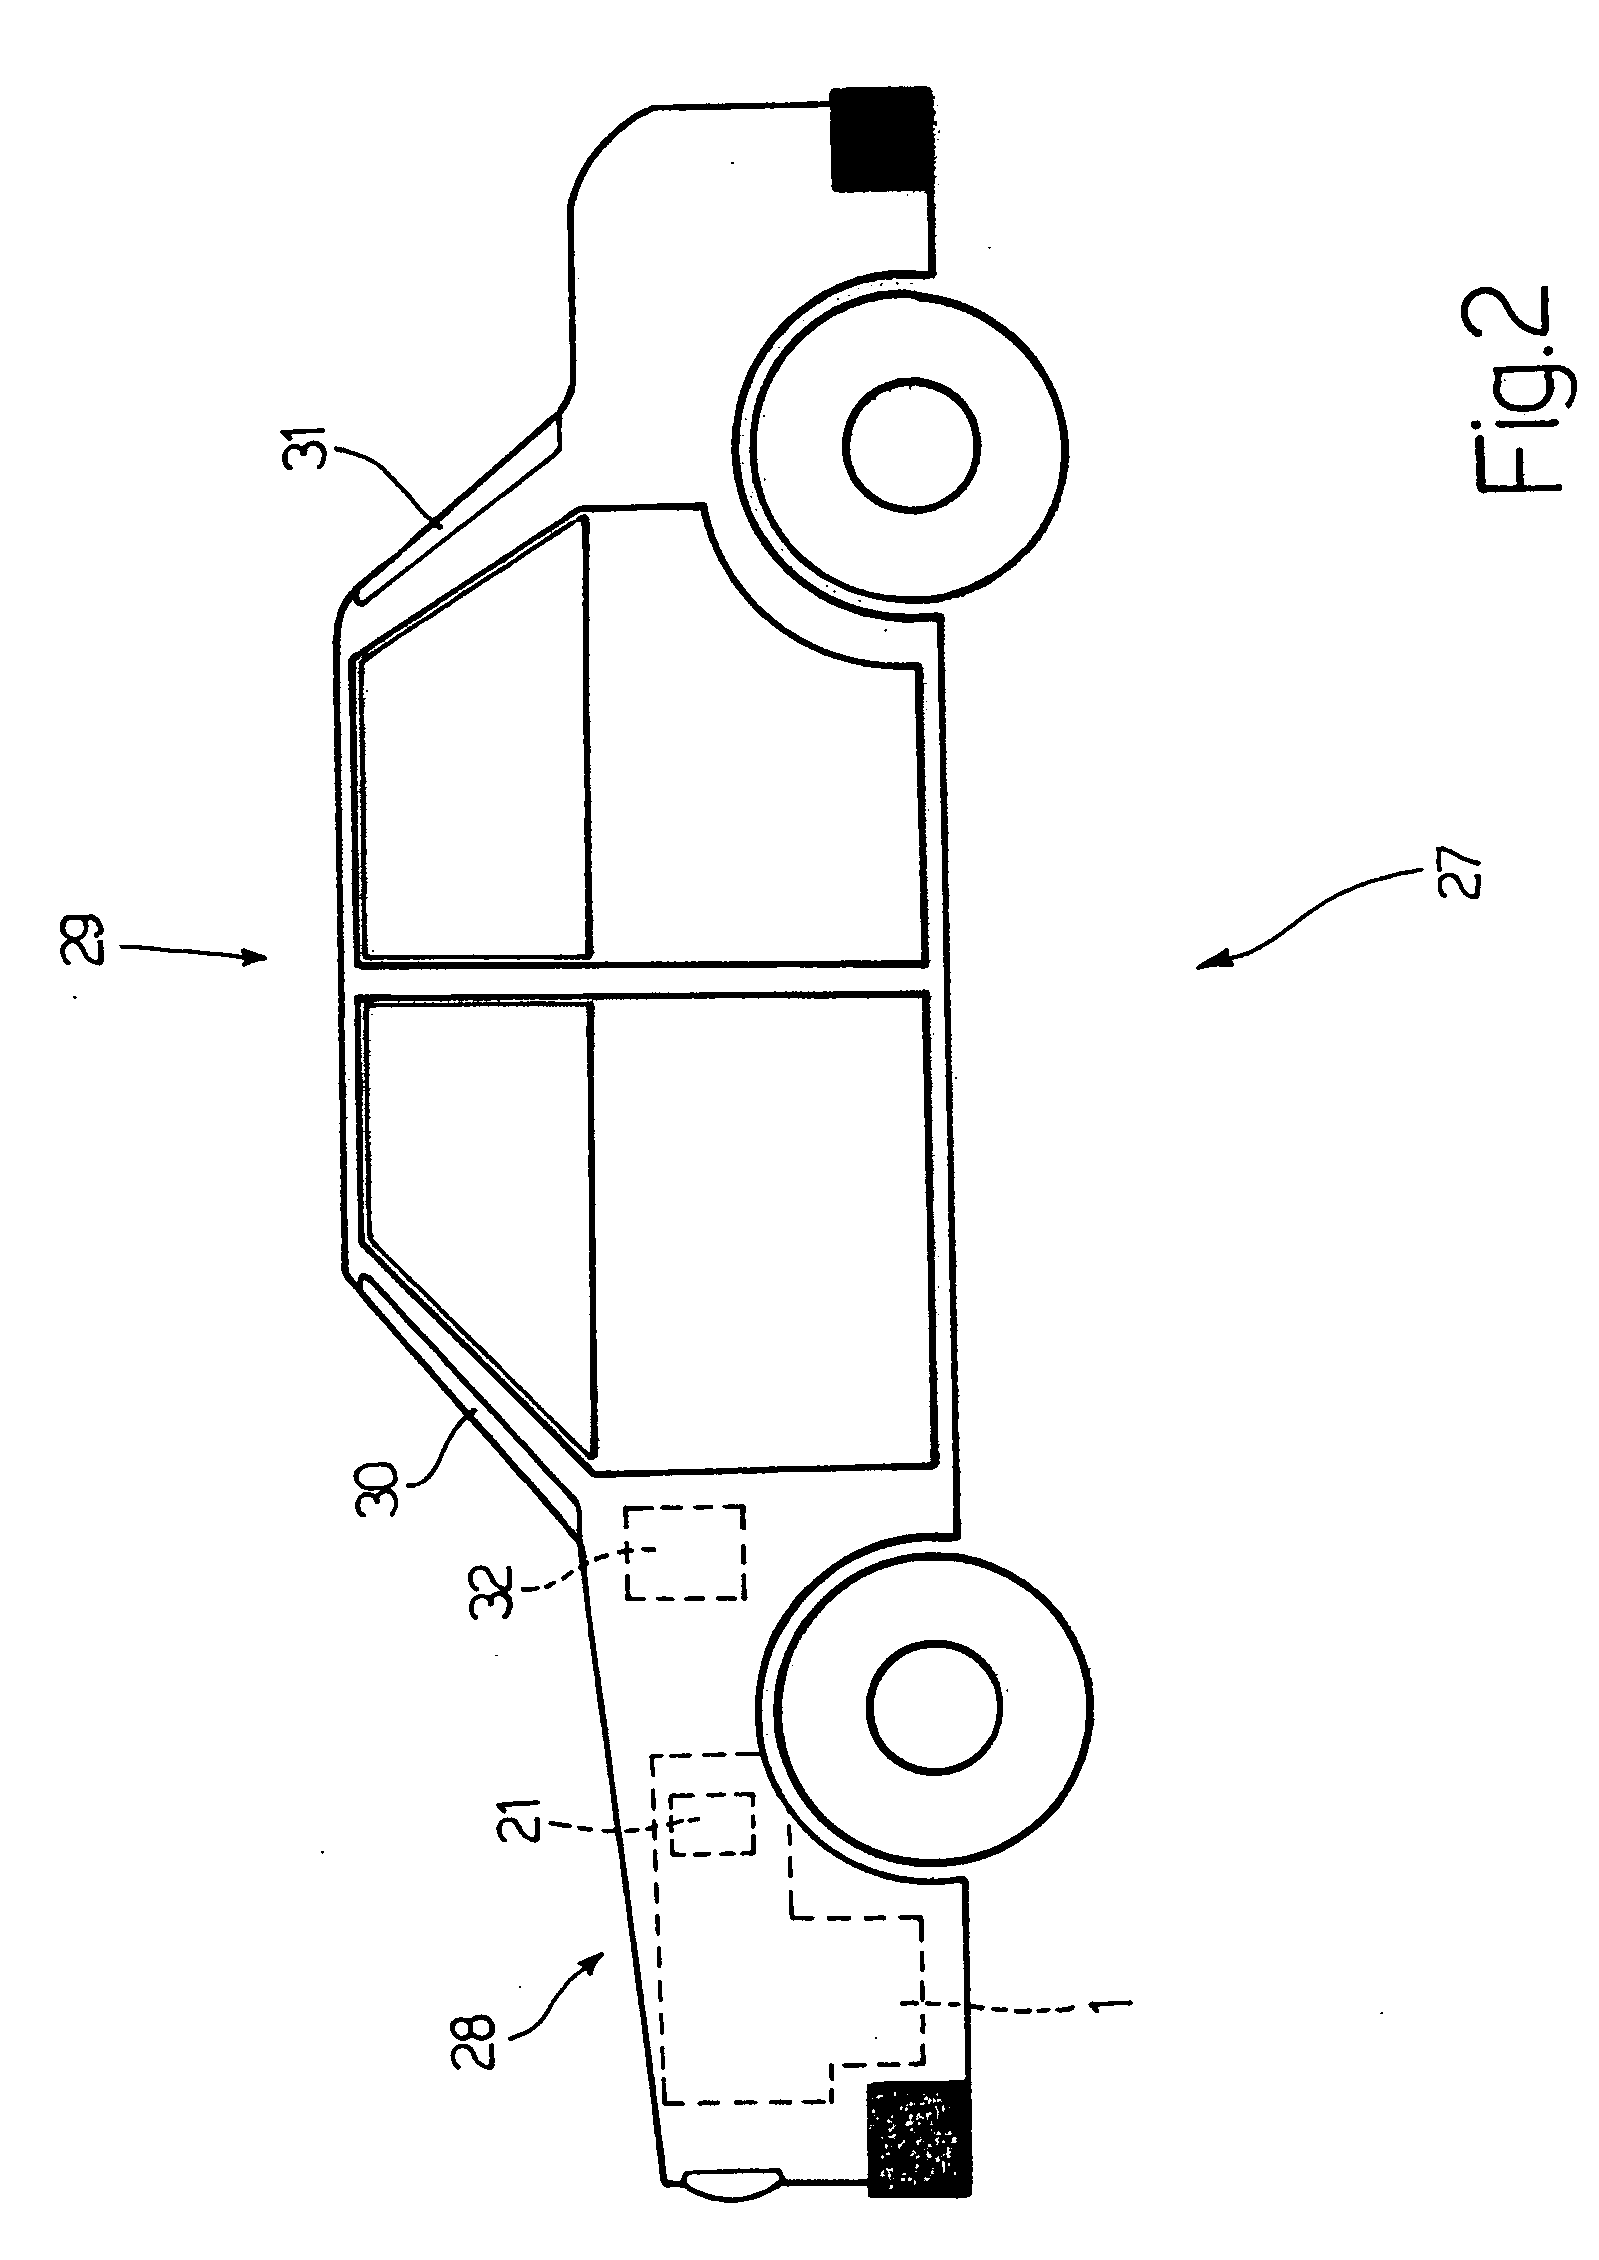 Method for managing the "stop-and-start" mode in a motor vehicle equipped with an internal combustion engine